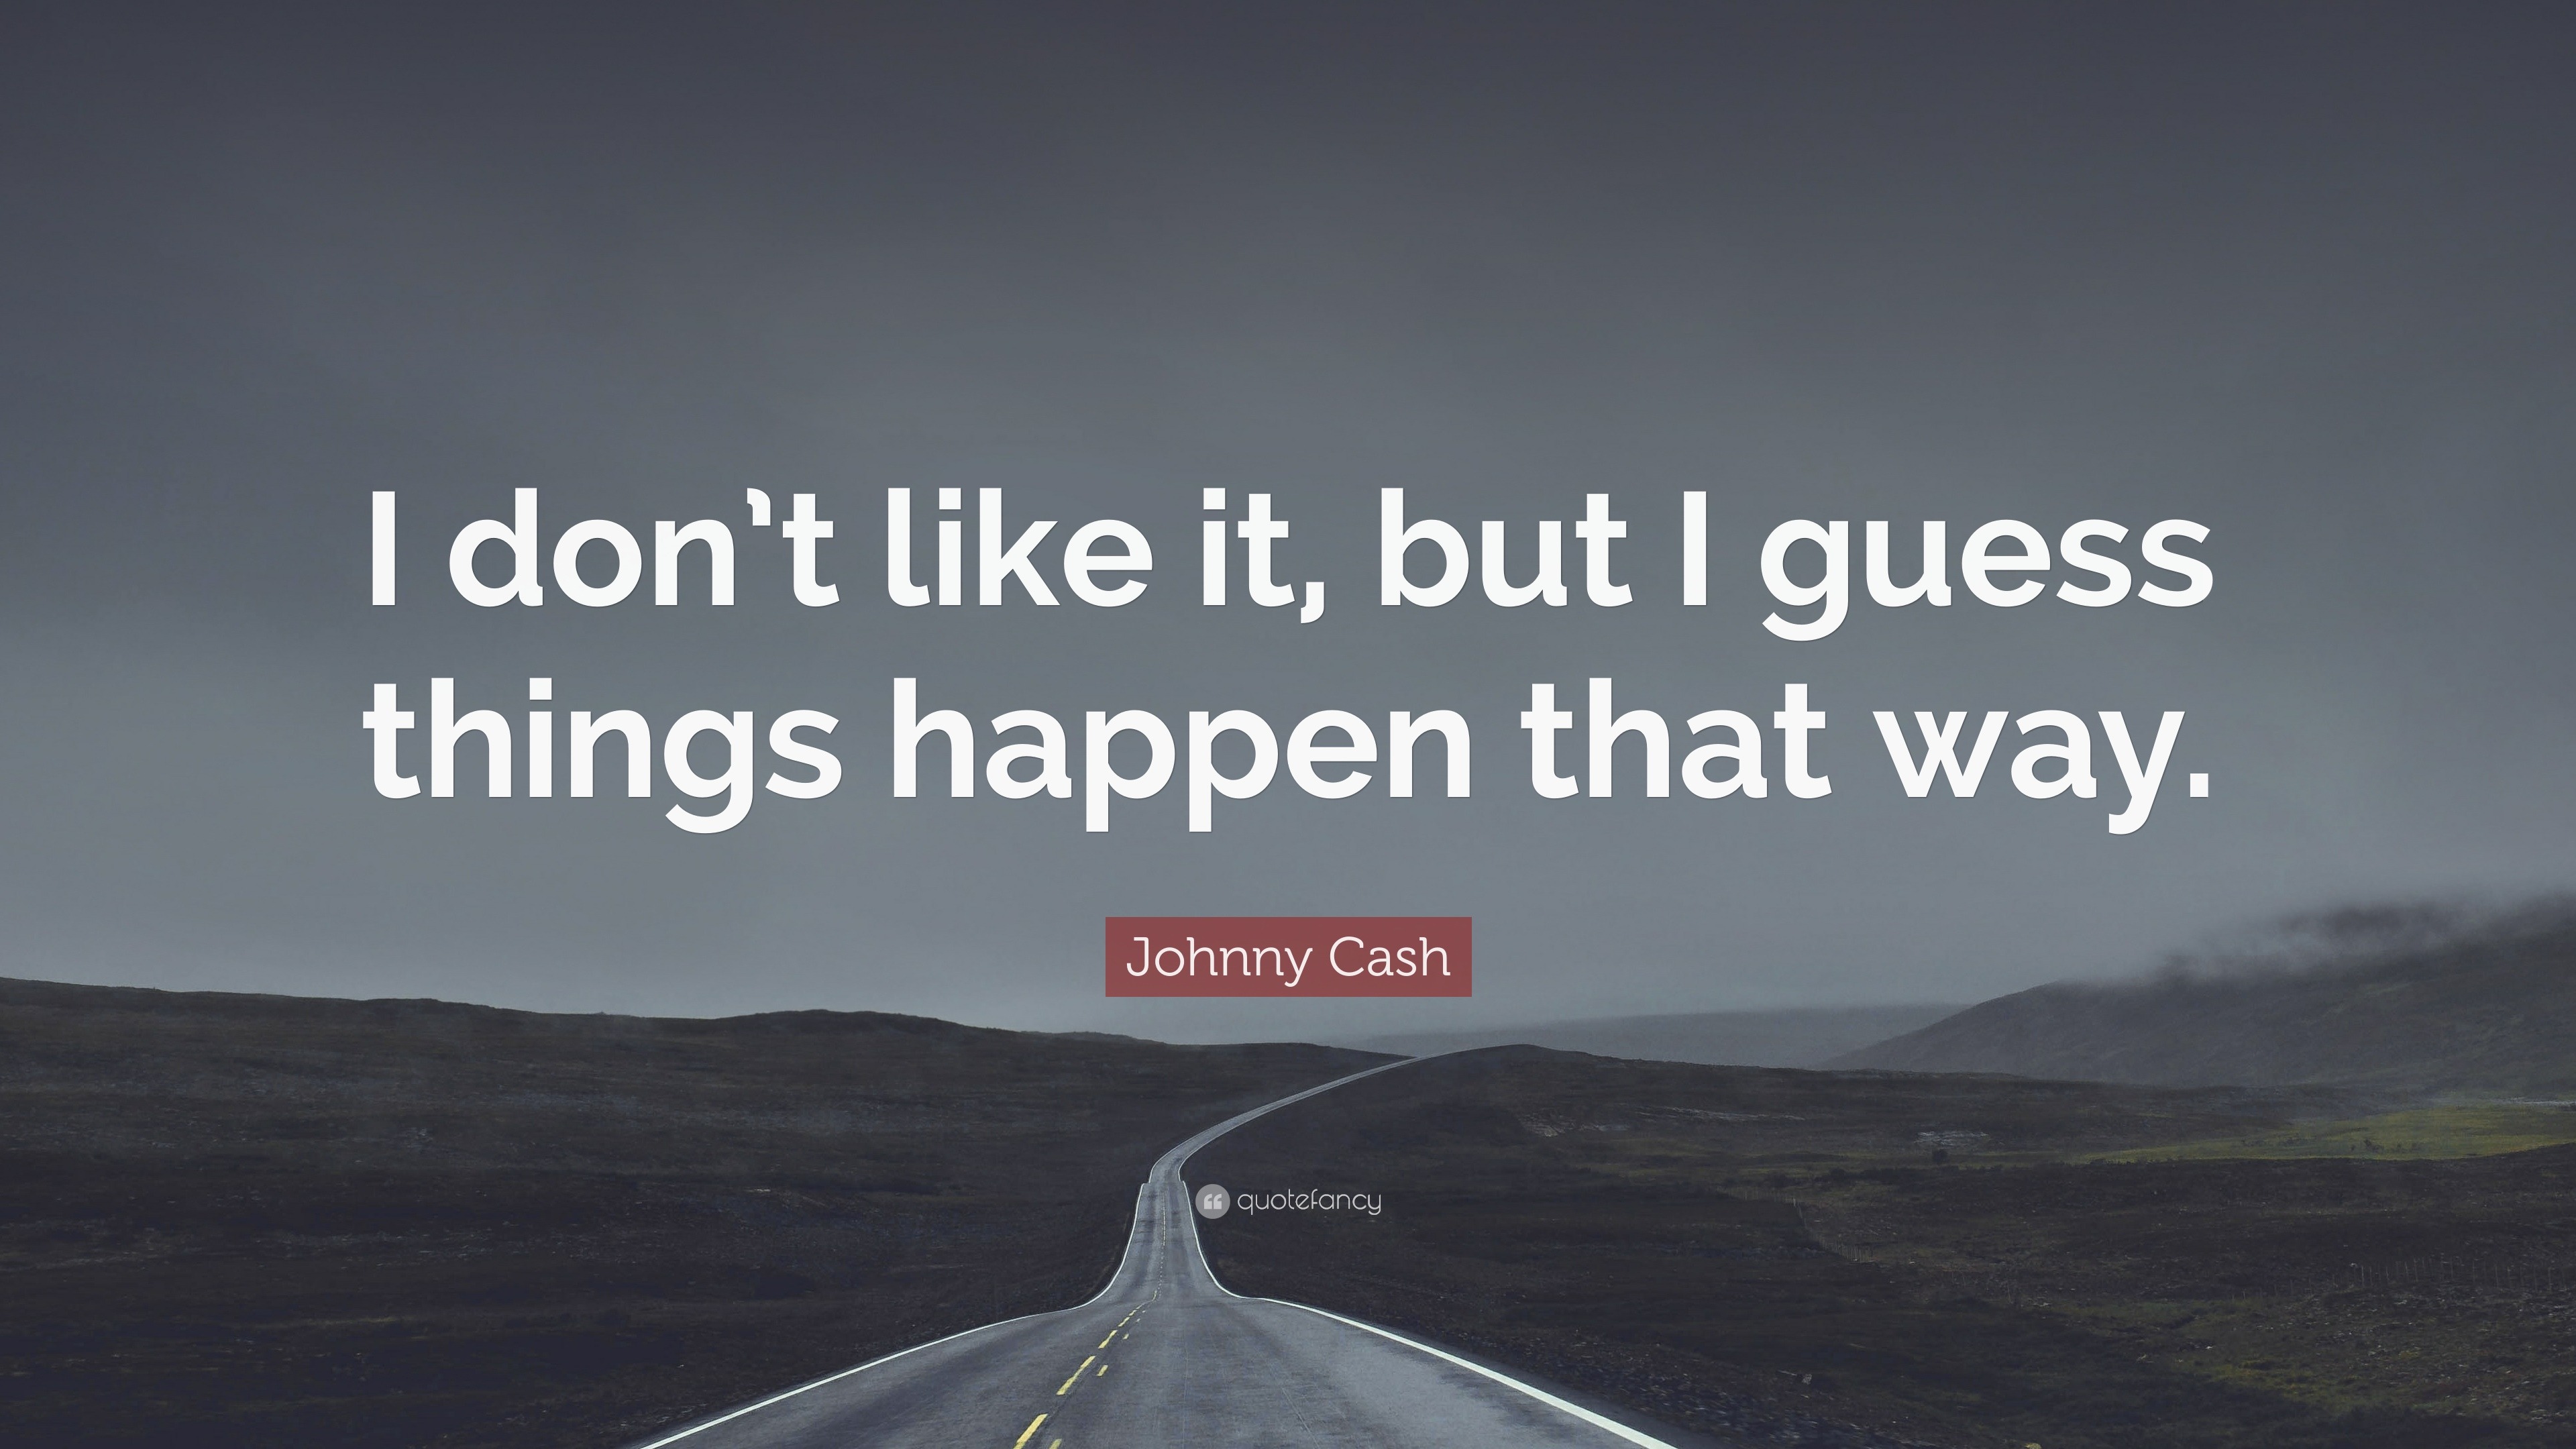 Johnny Cash Quotes About Life for kids